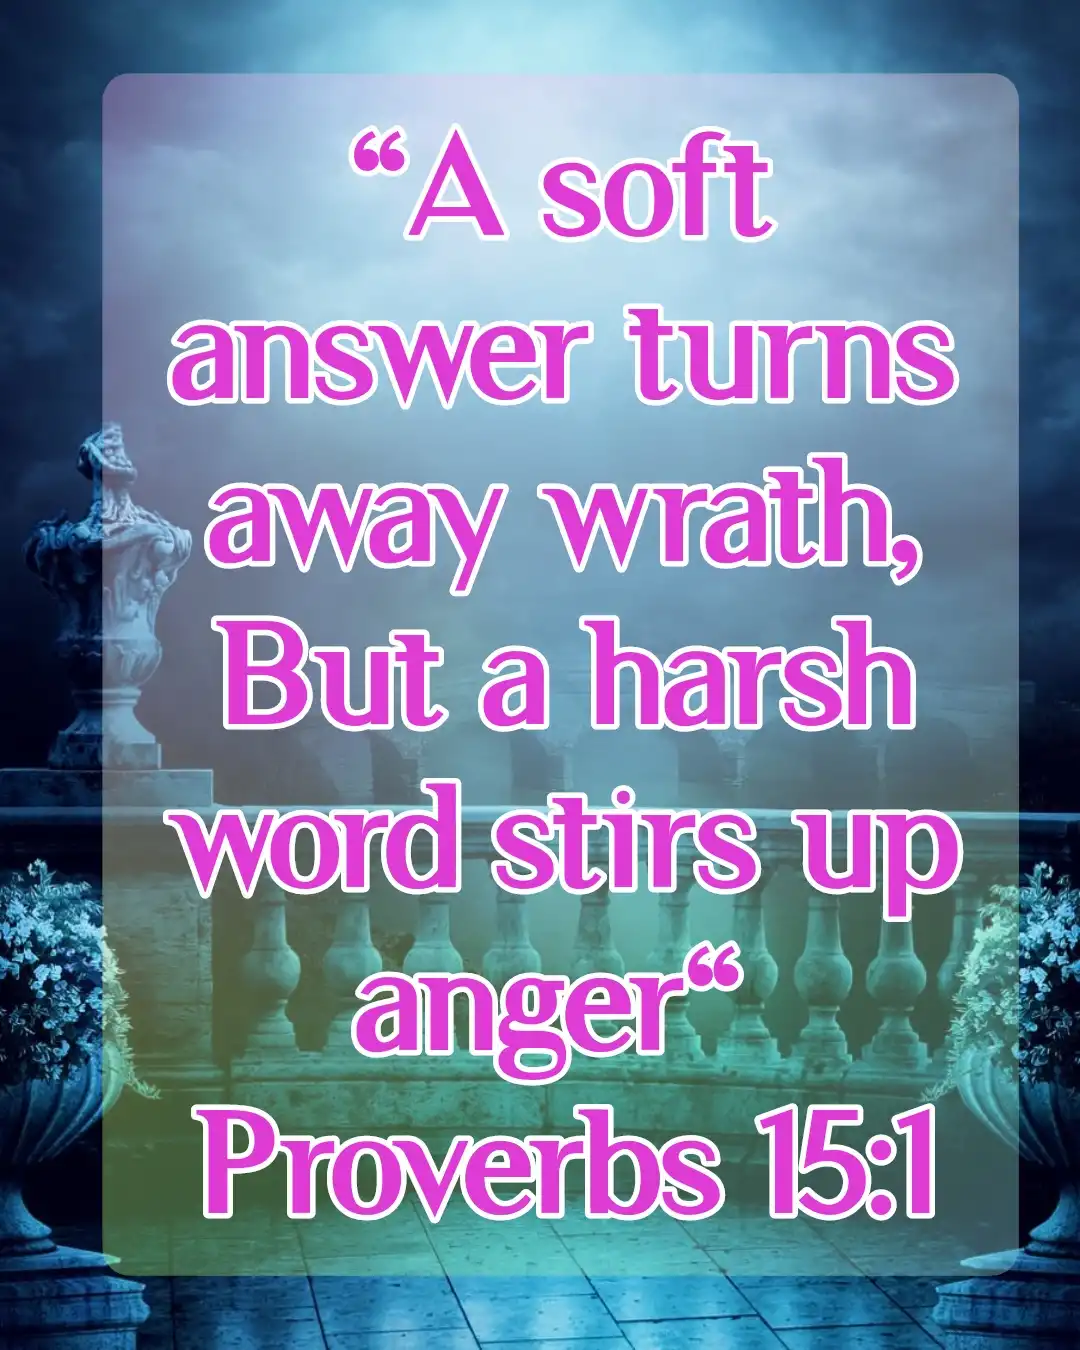 Bible Verses About Bad Language (Proverbs 15:1)